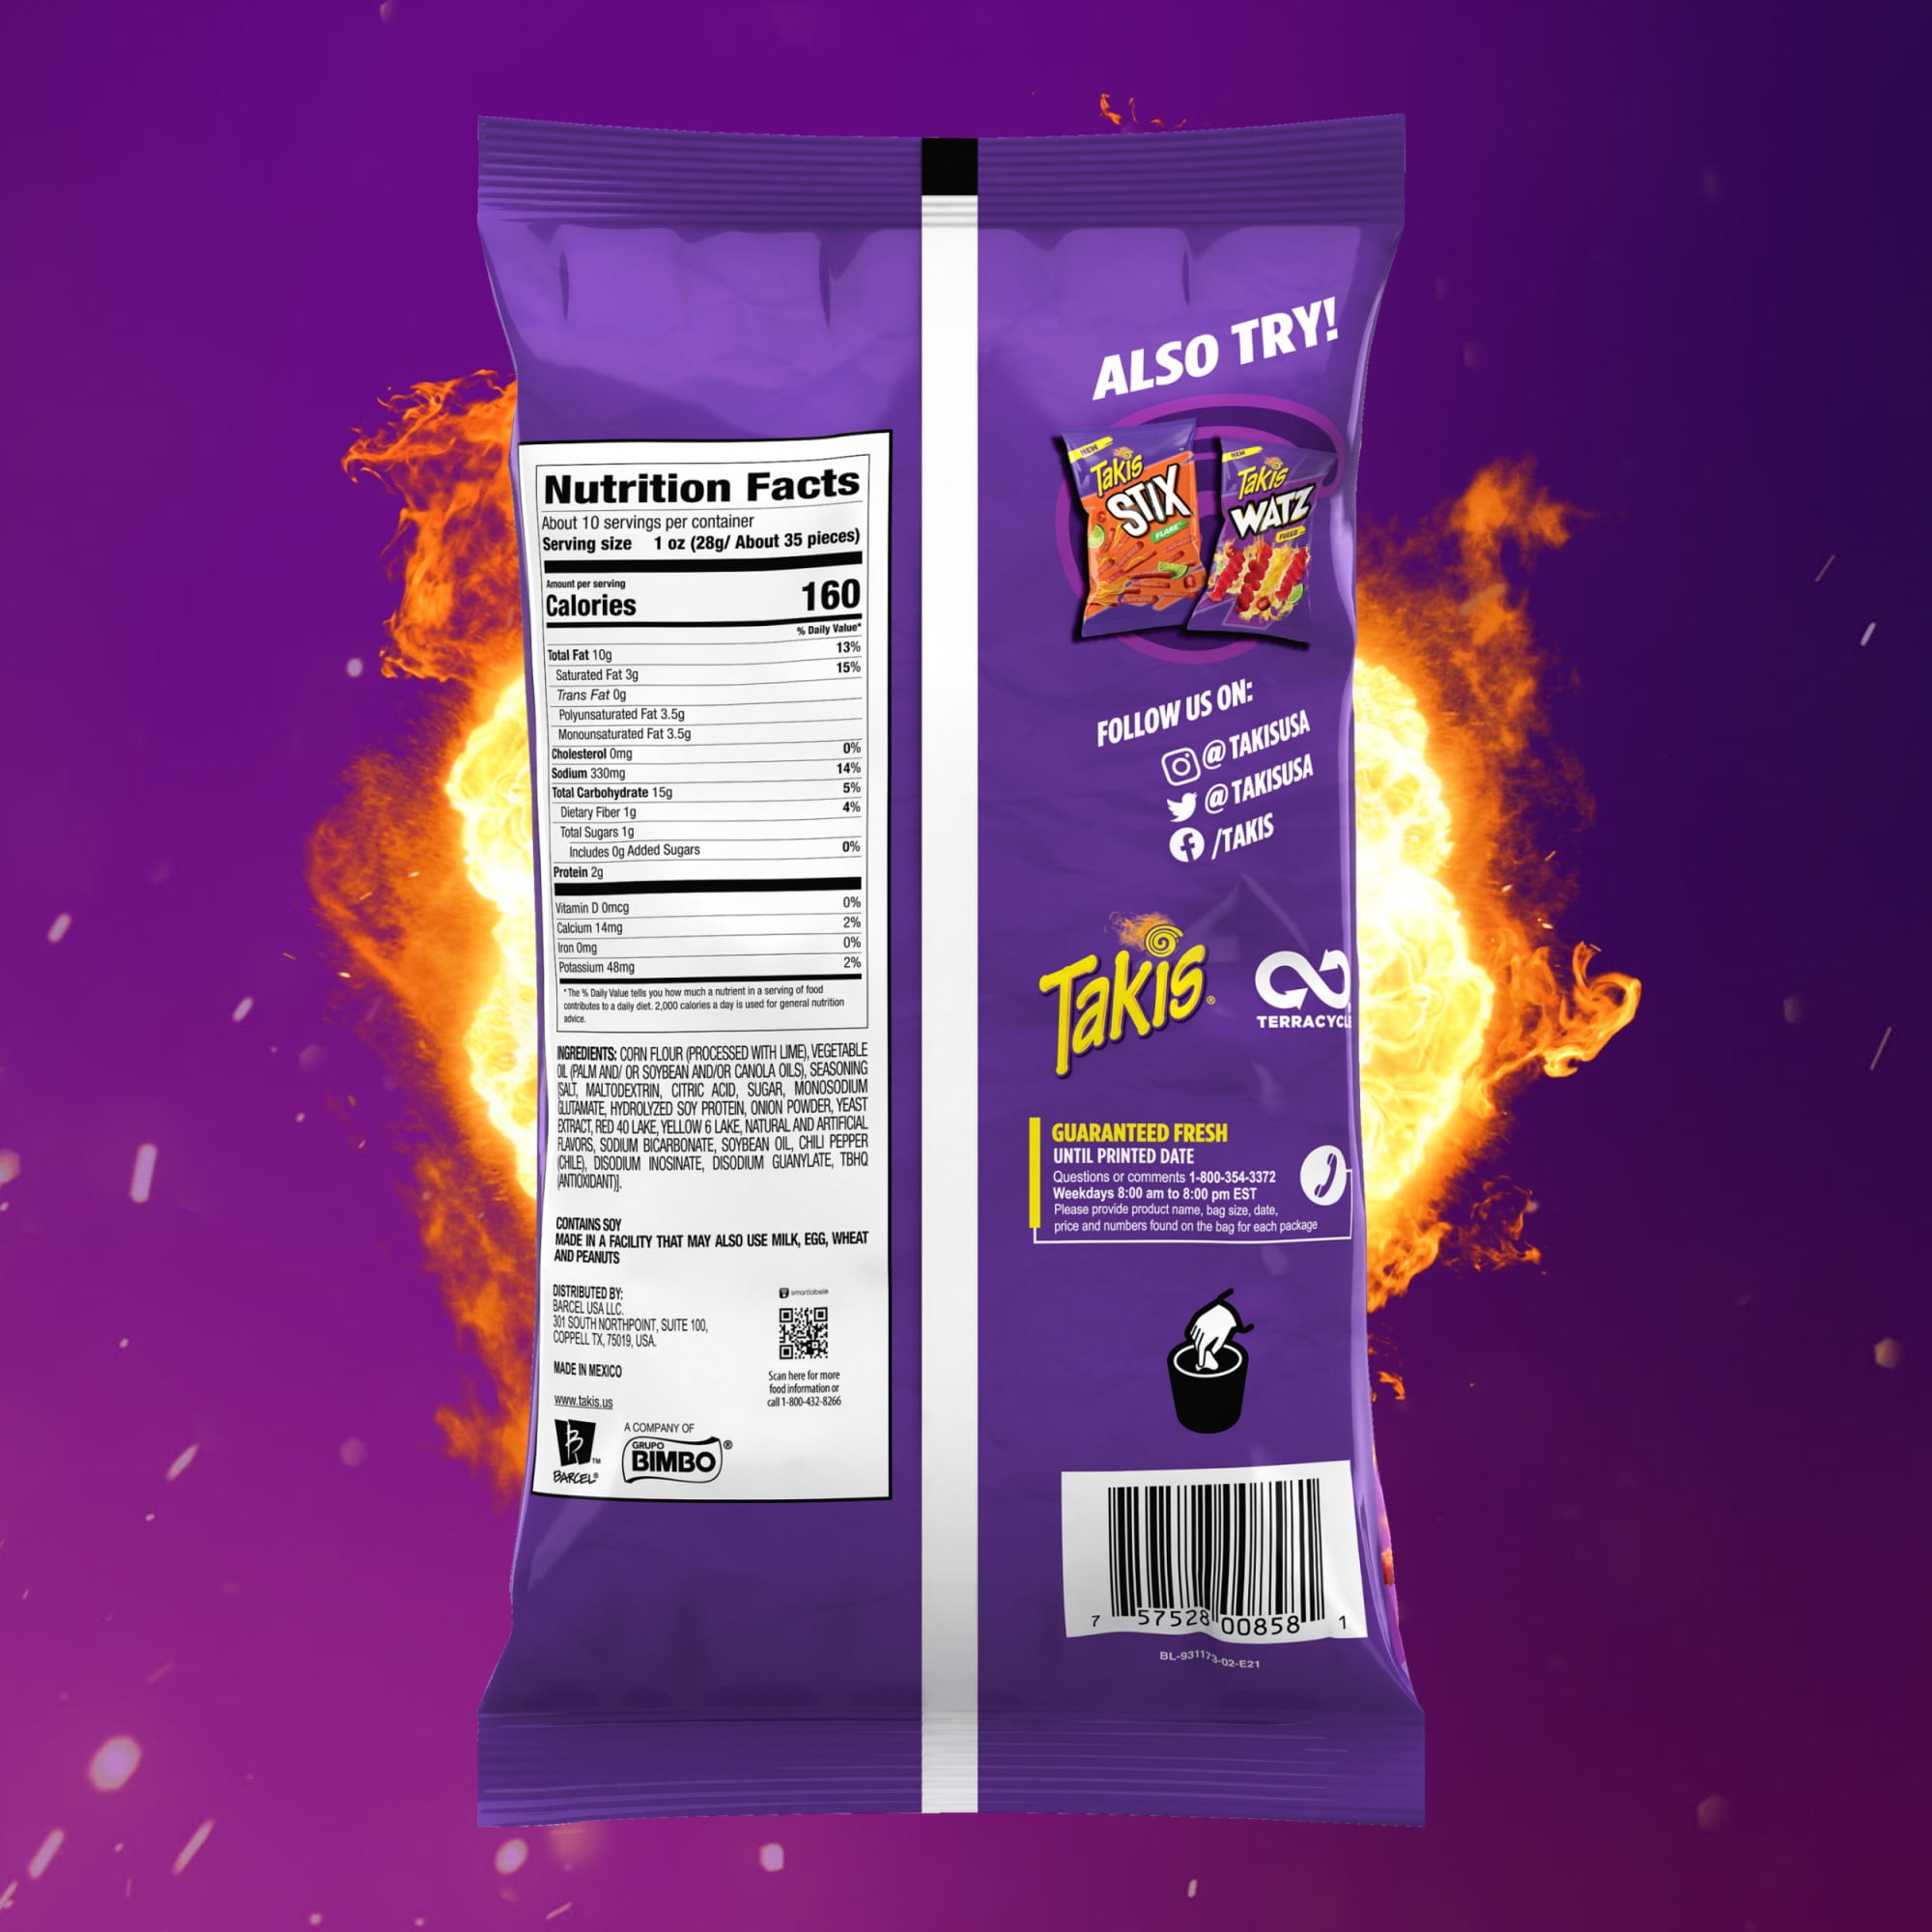 Takis Fuego Stix 6 pc / 4 oz Snack Size Case, Hot Chili Pepper & Lime  Flavored Extreme Spicy Corn Snack Sticks